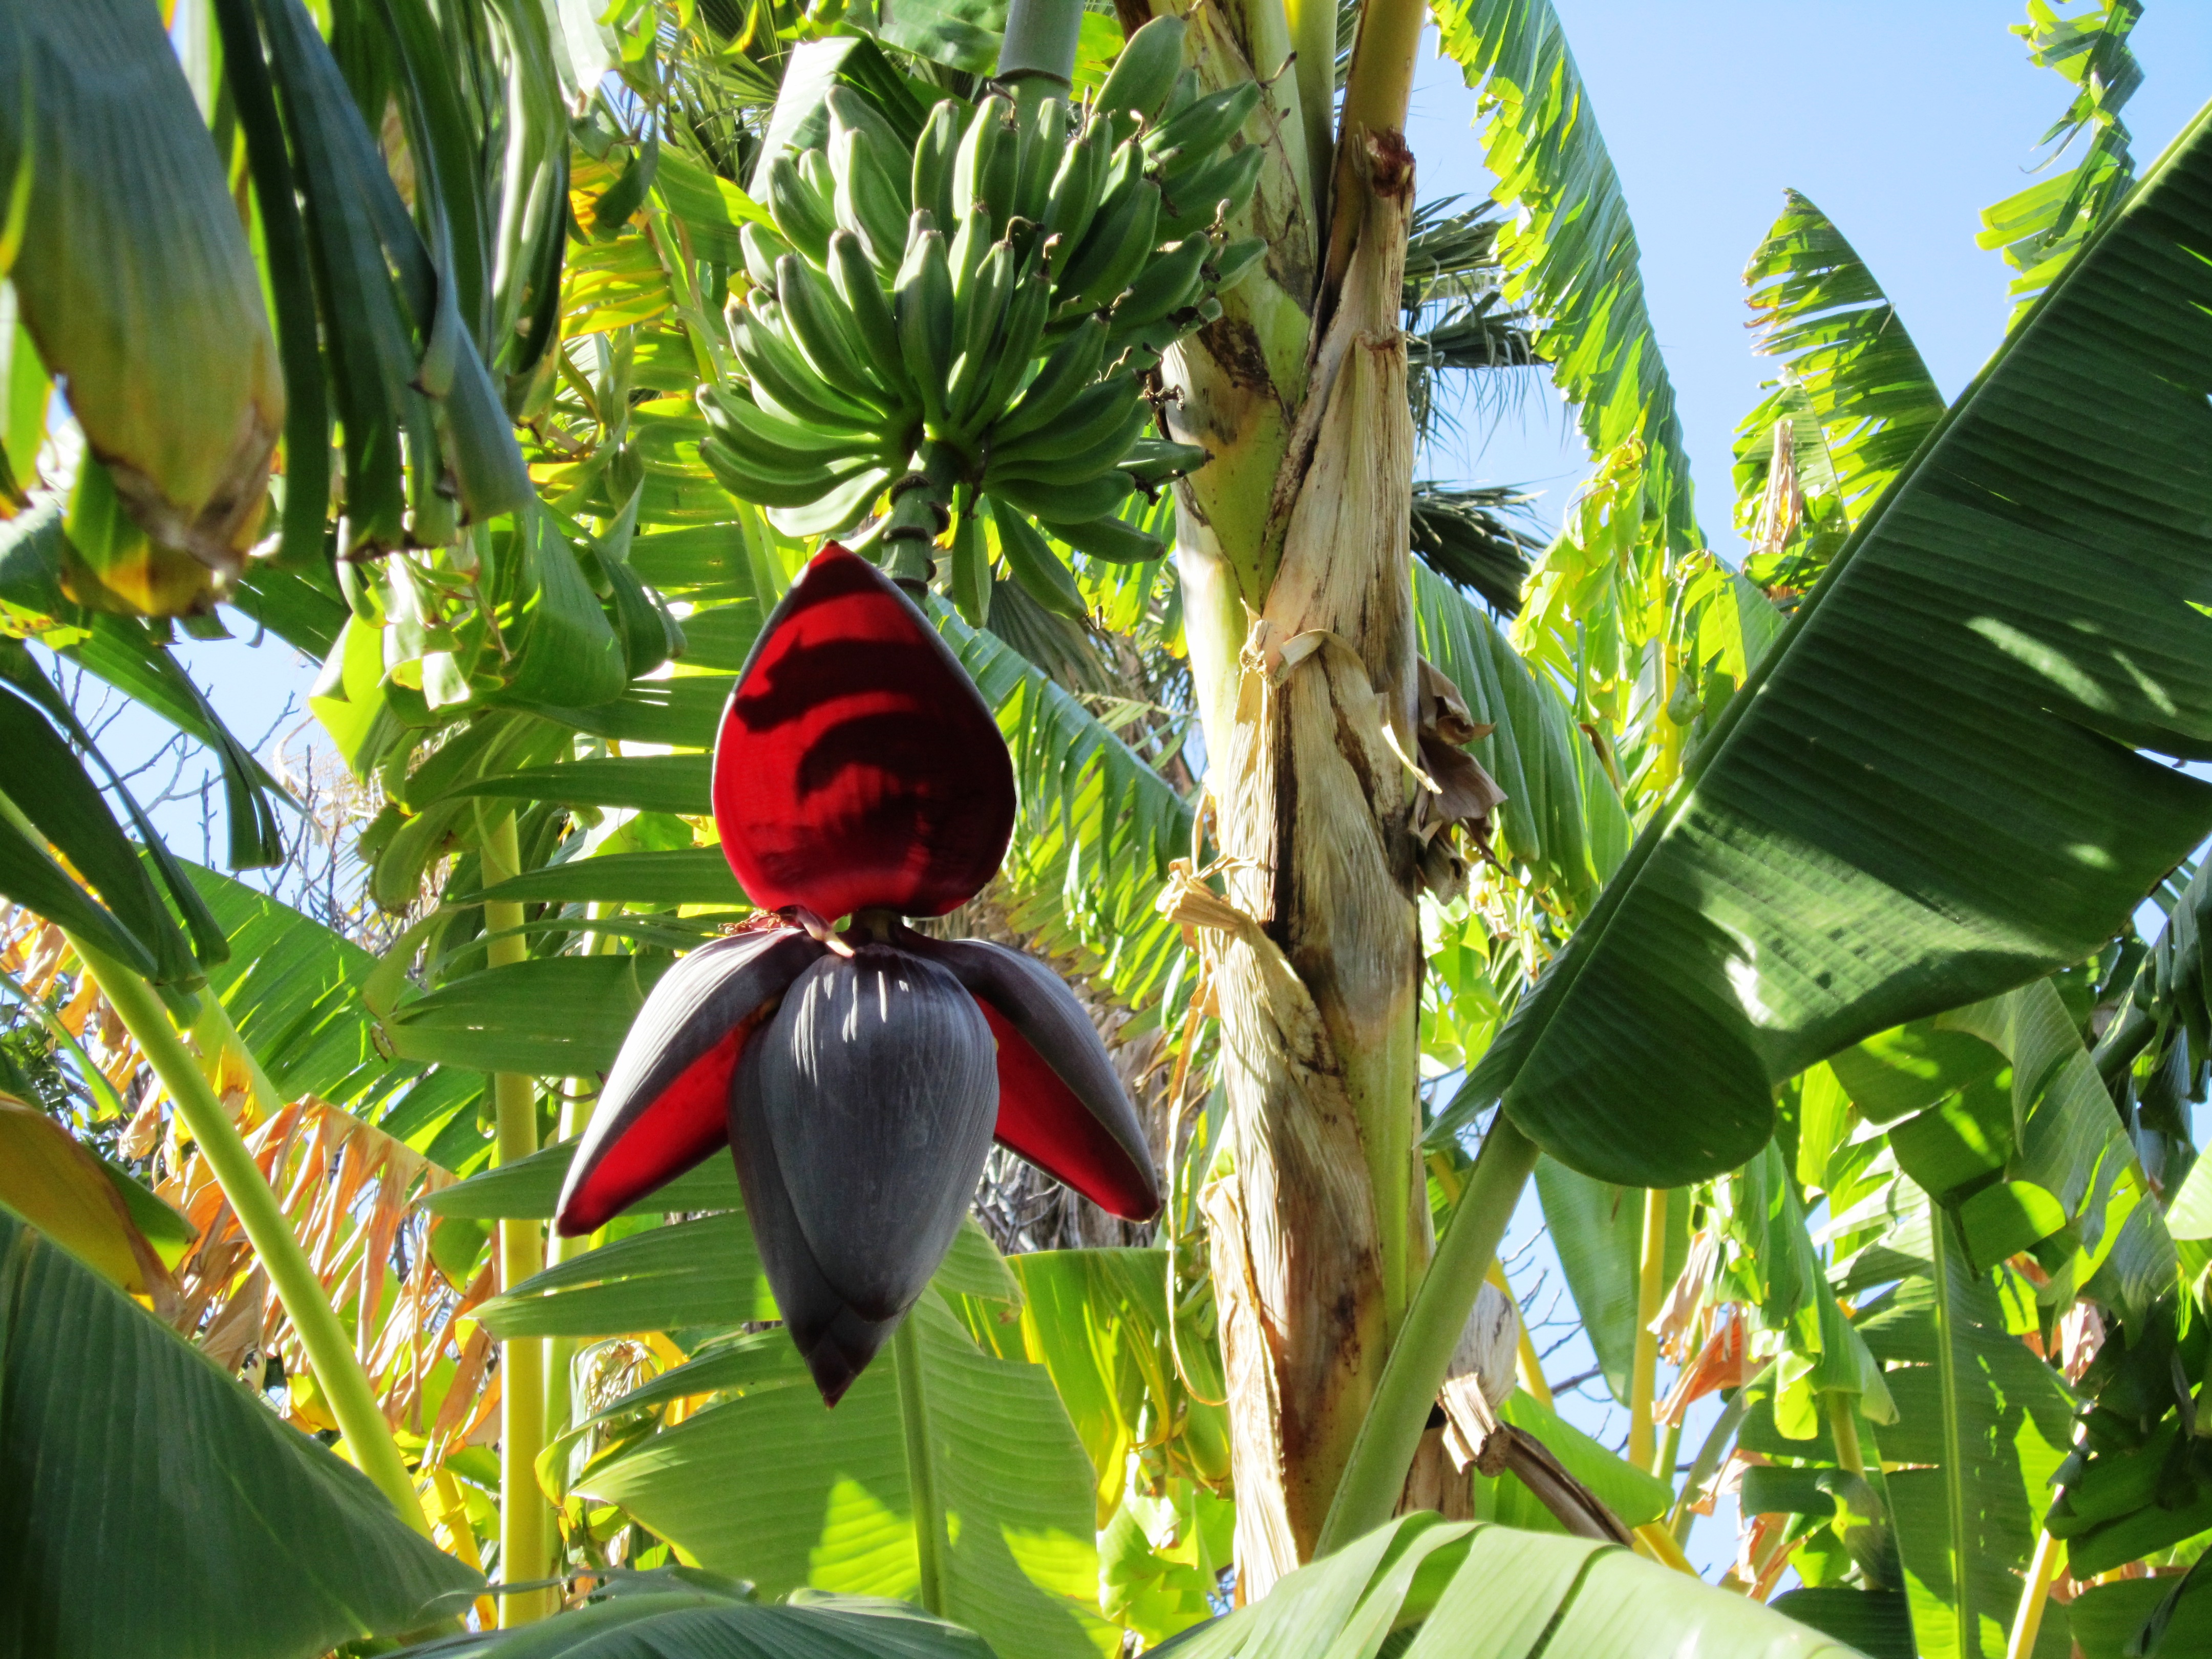 Related Article Banana Tree Pictures